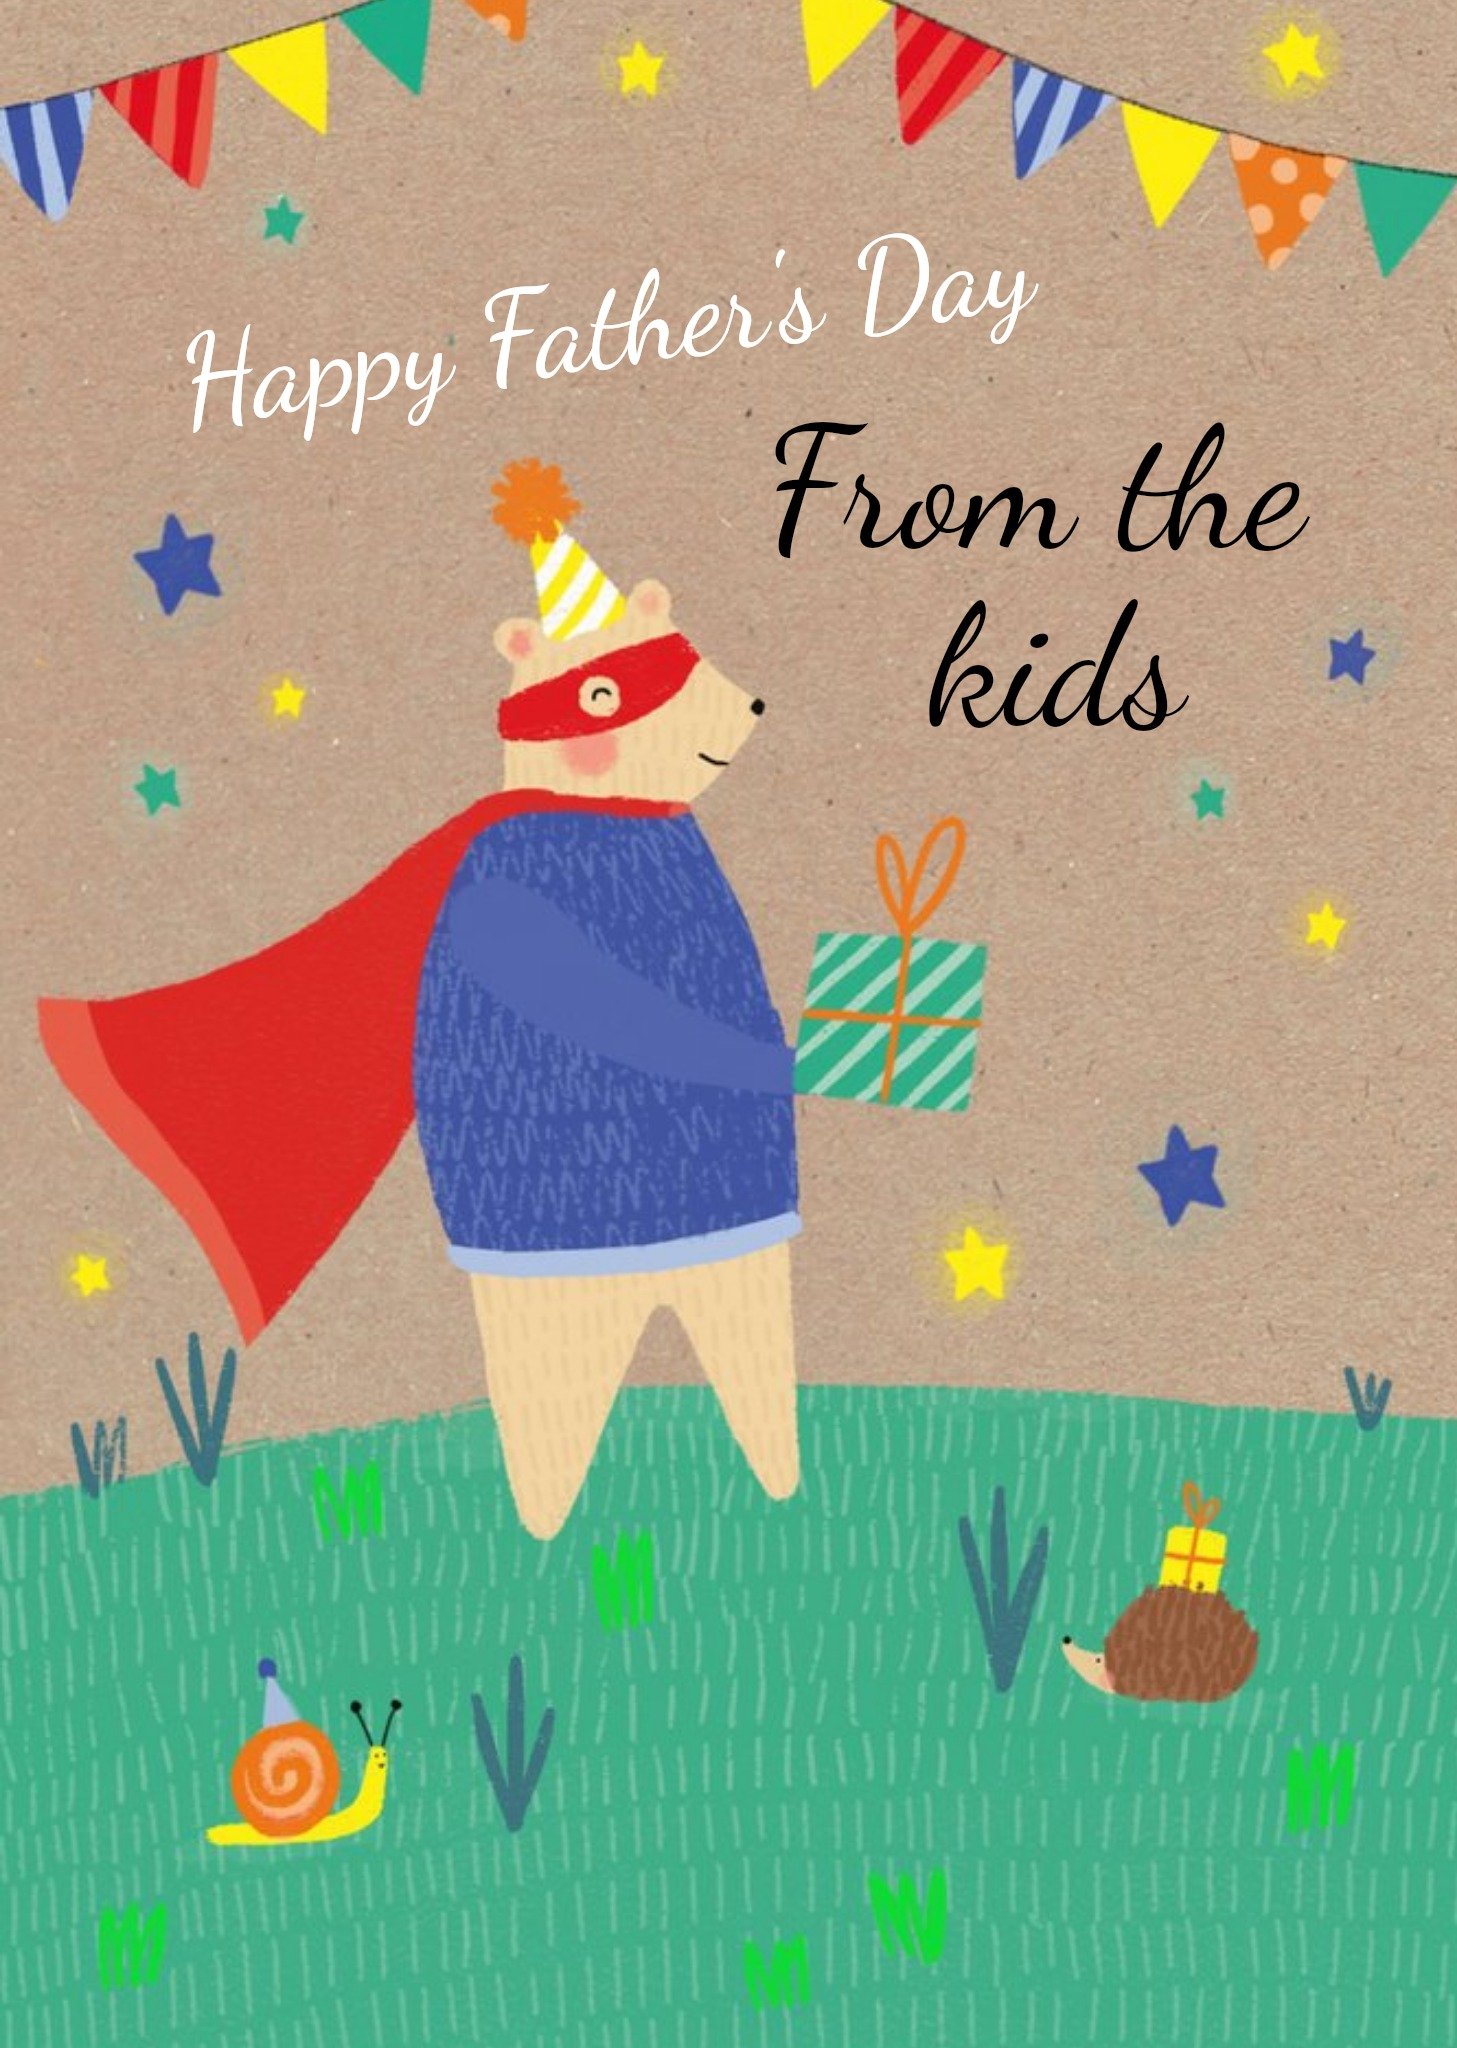 Moonpig Cute Bear Illustration From The Kids Father's Day Card Ecard